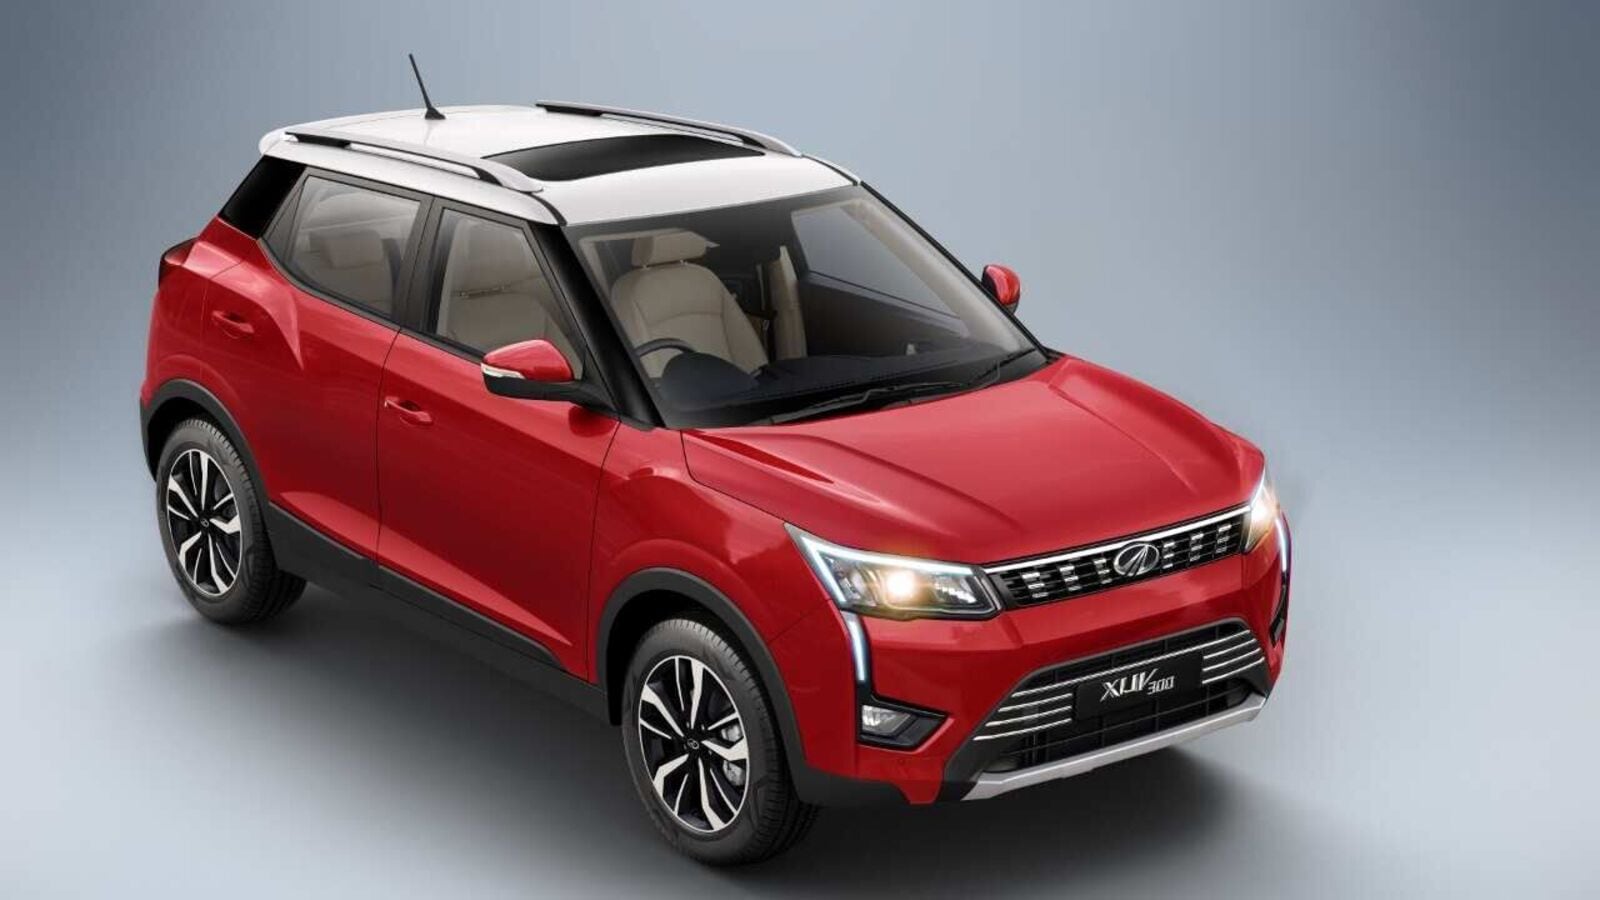 Mahindra XUV300 fullyelectric SUV to launch early 2023 HT Auto